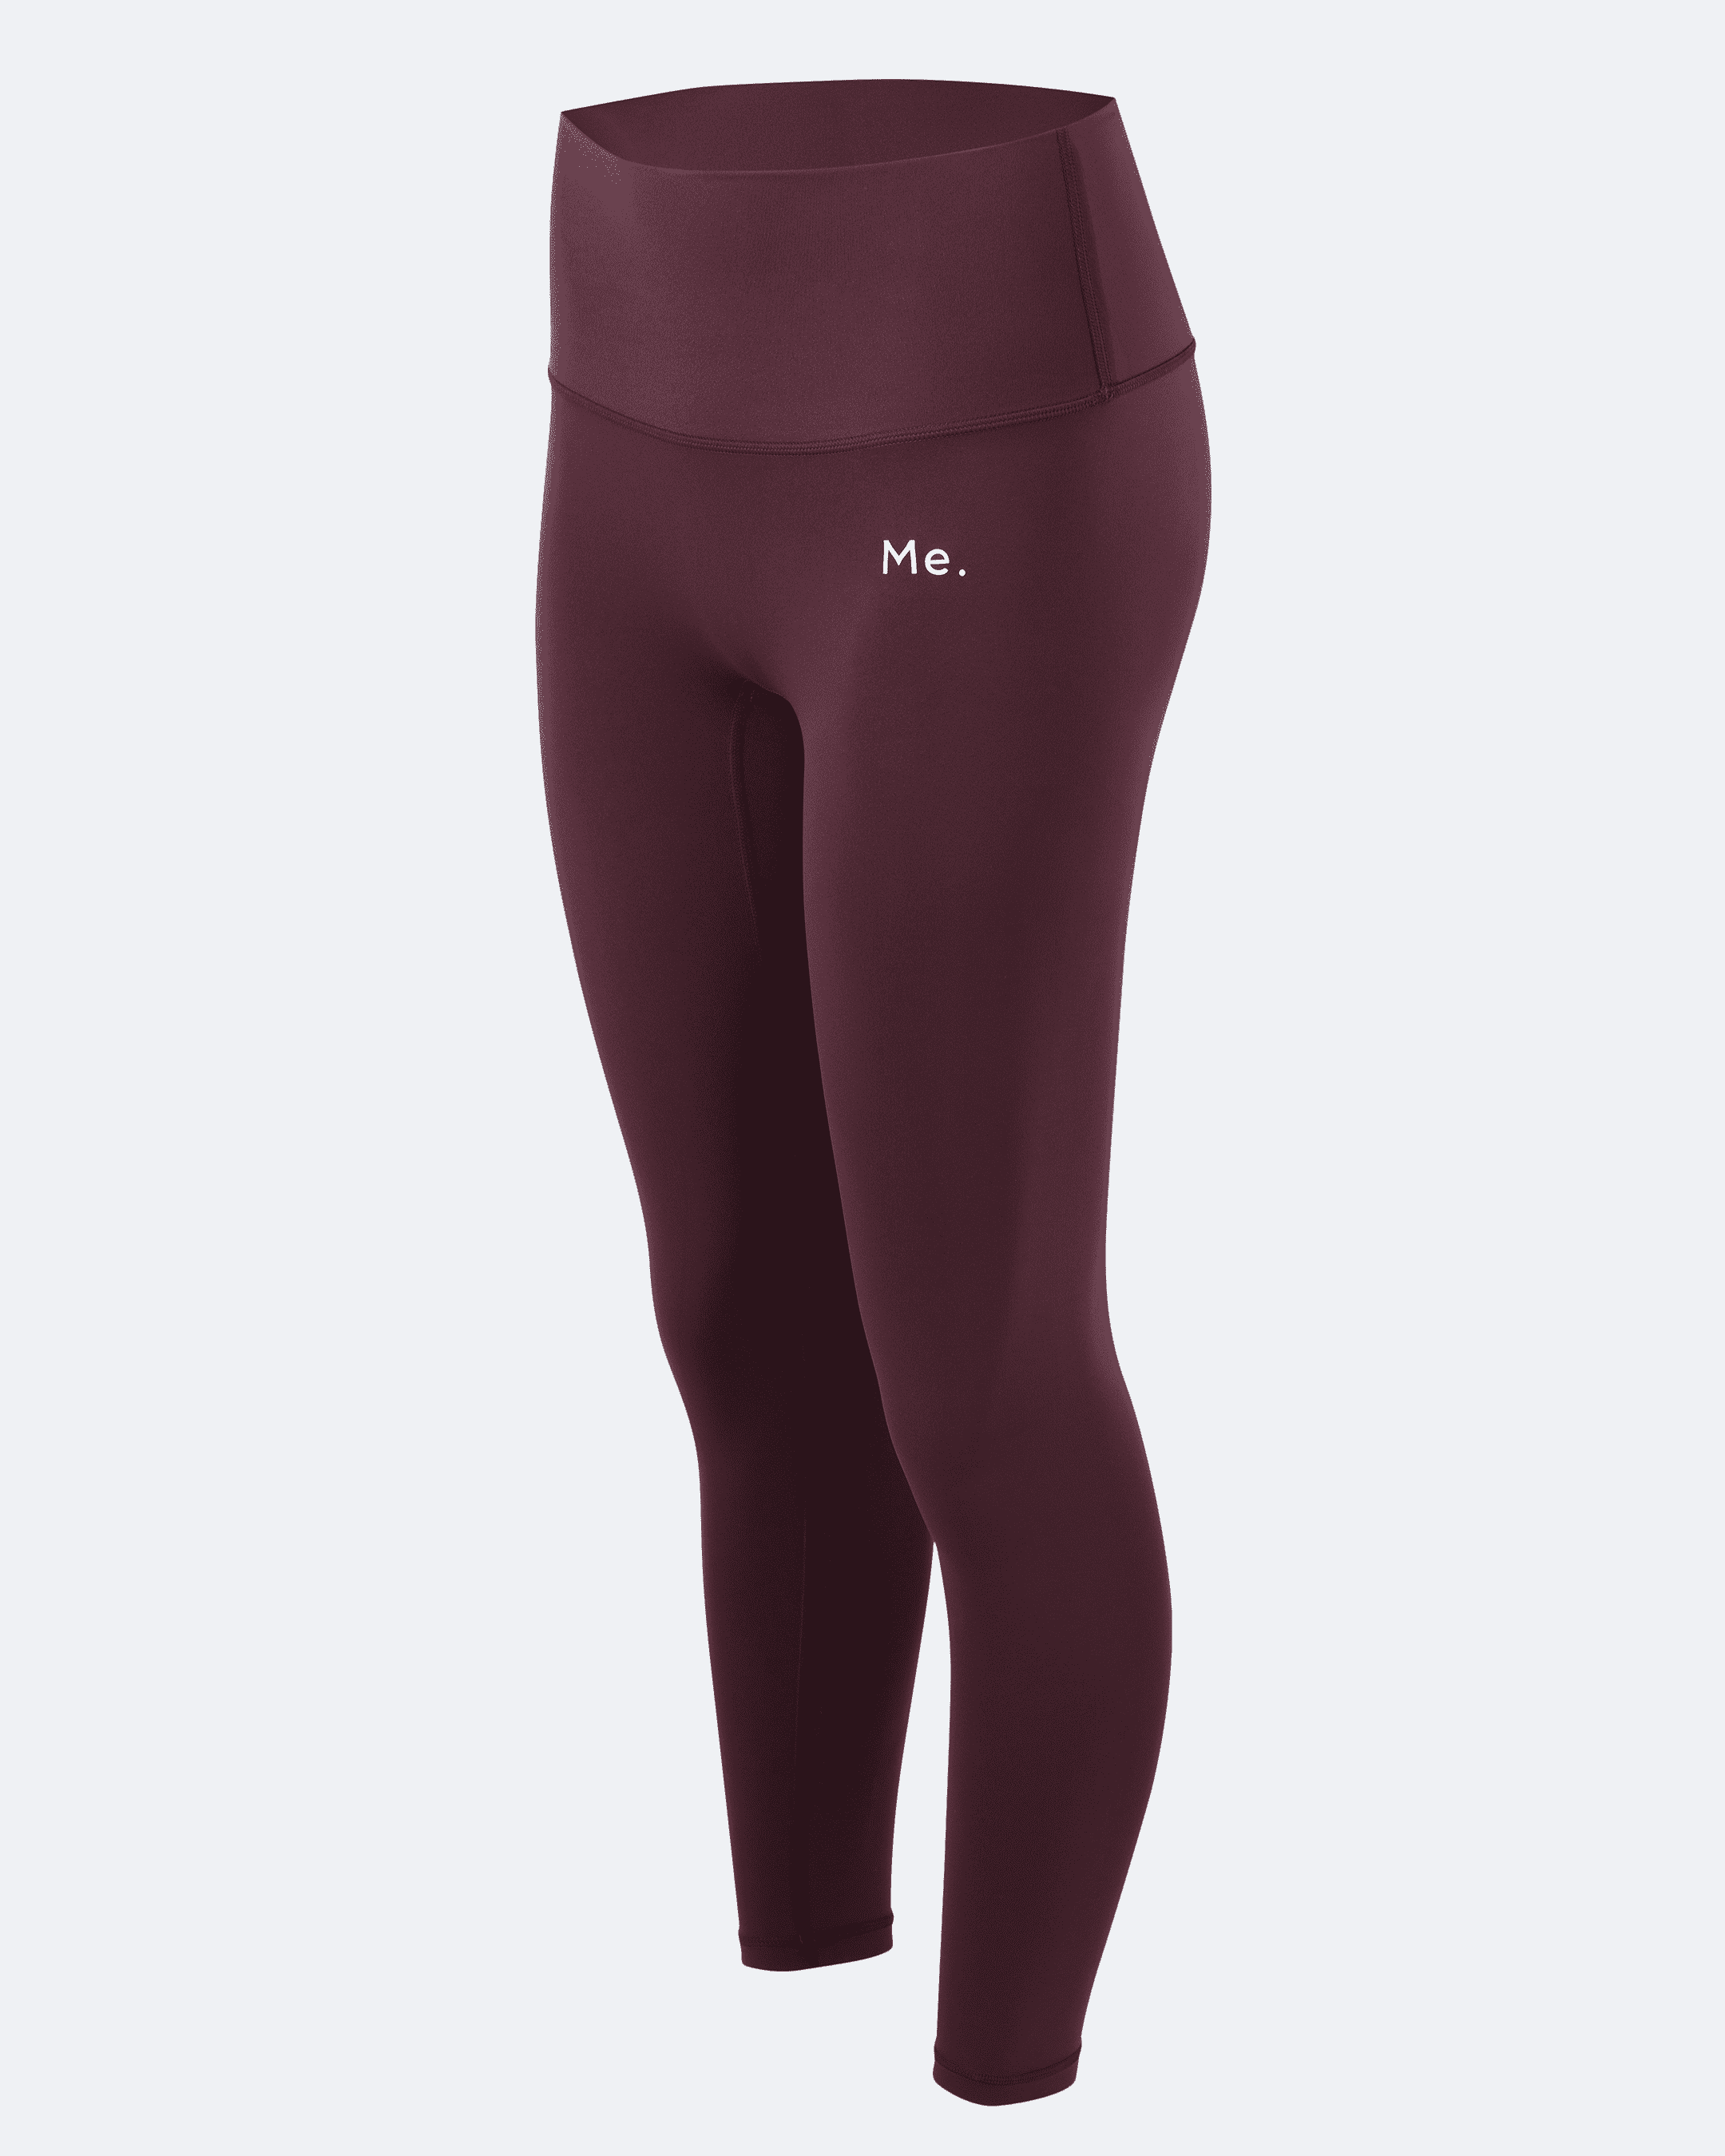 Maxtreme Power me Coral Ankle Pocket Women's Leggings